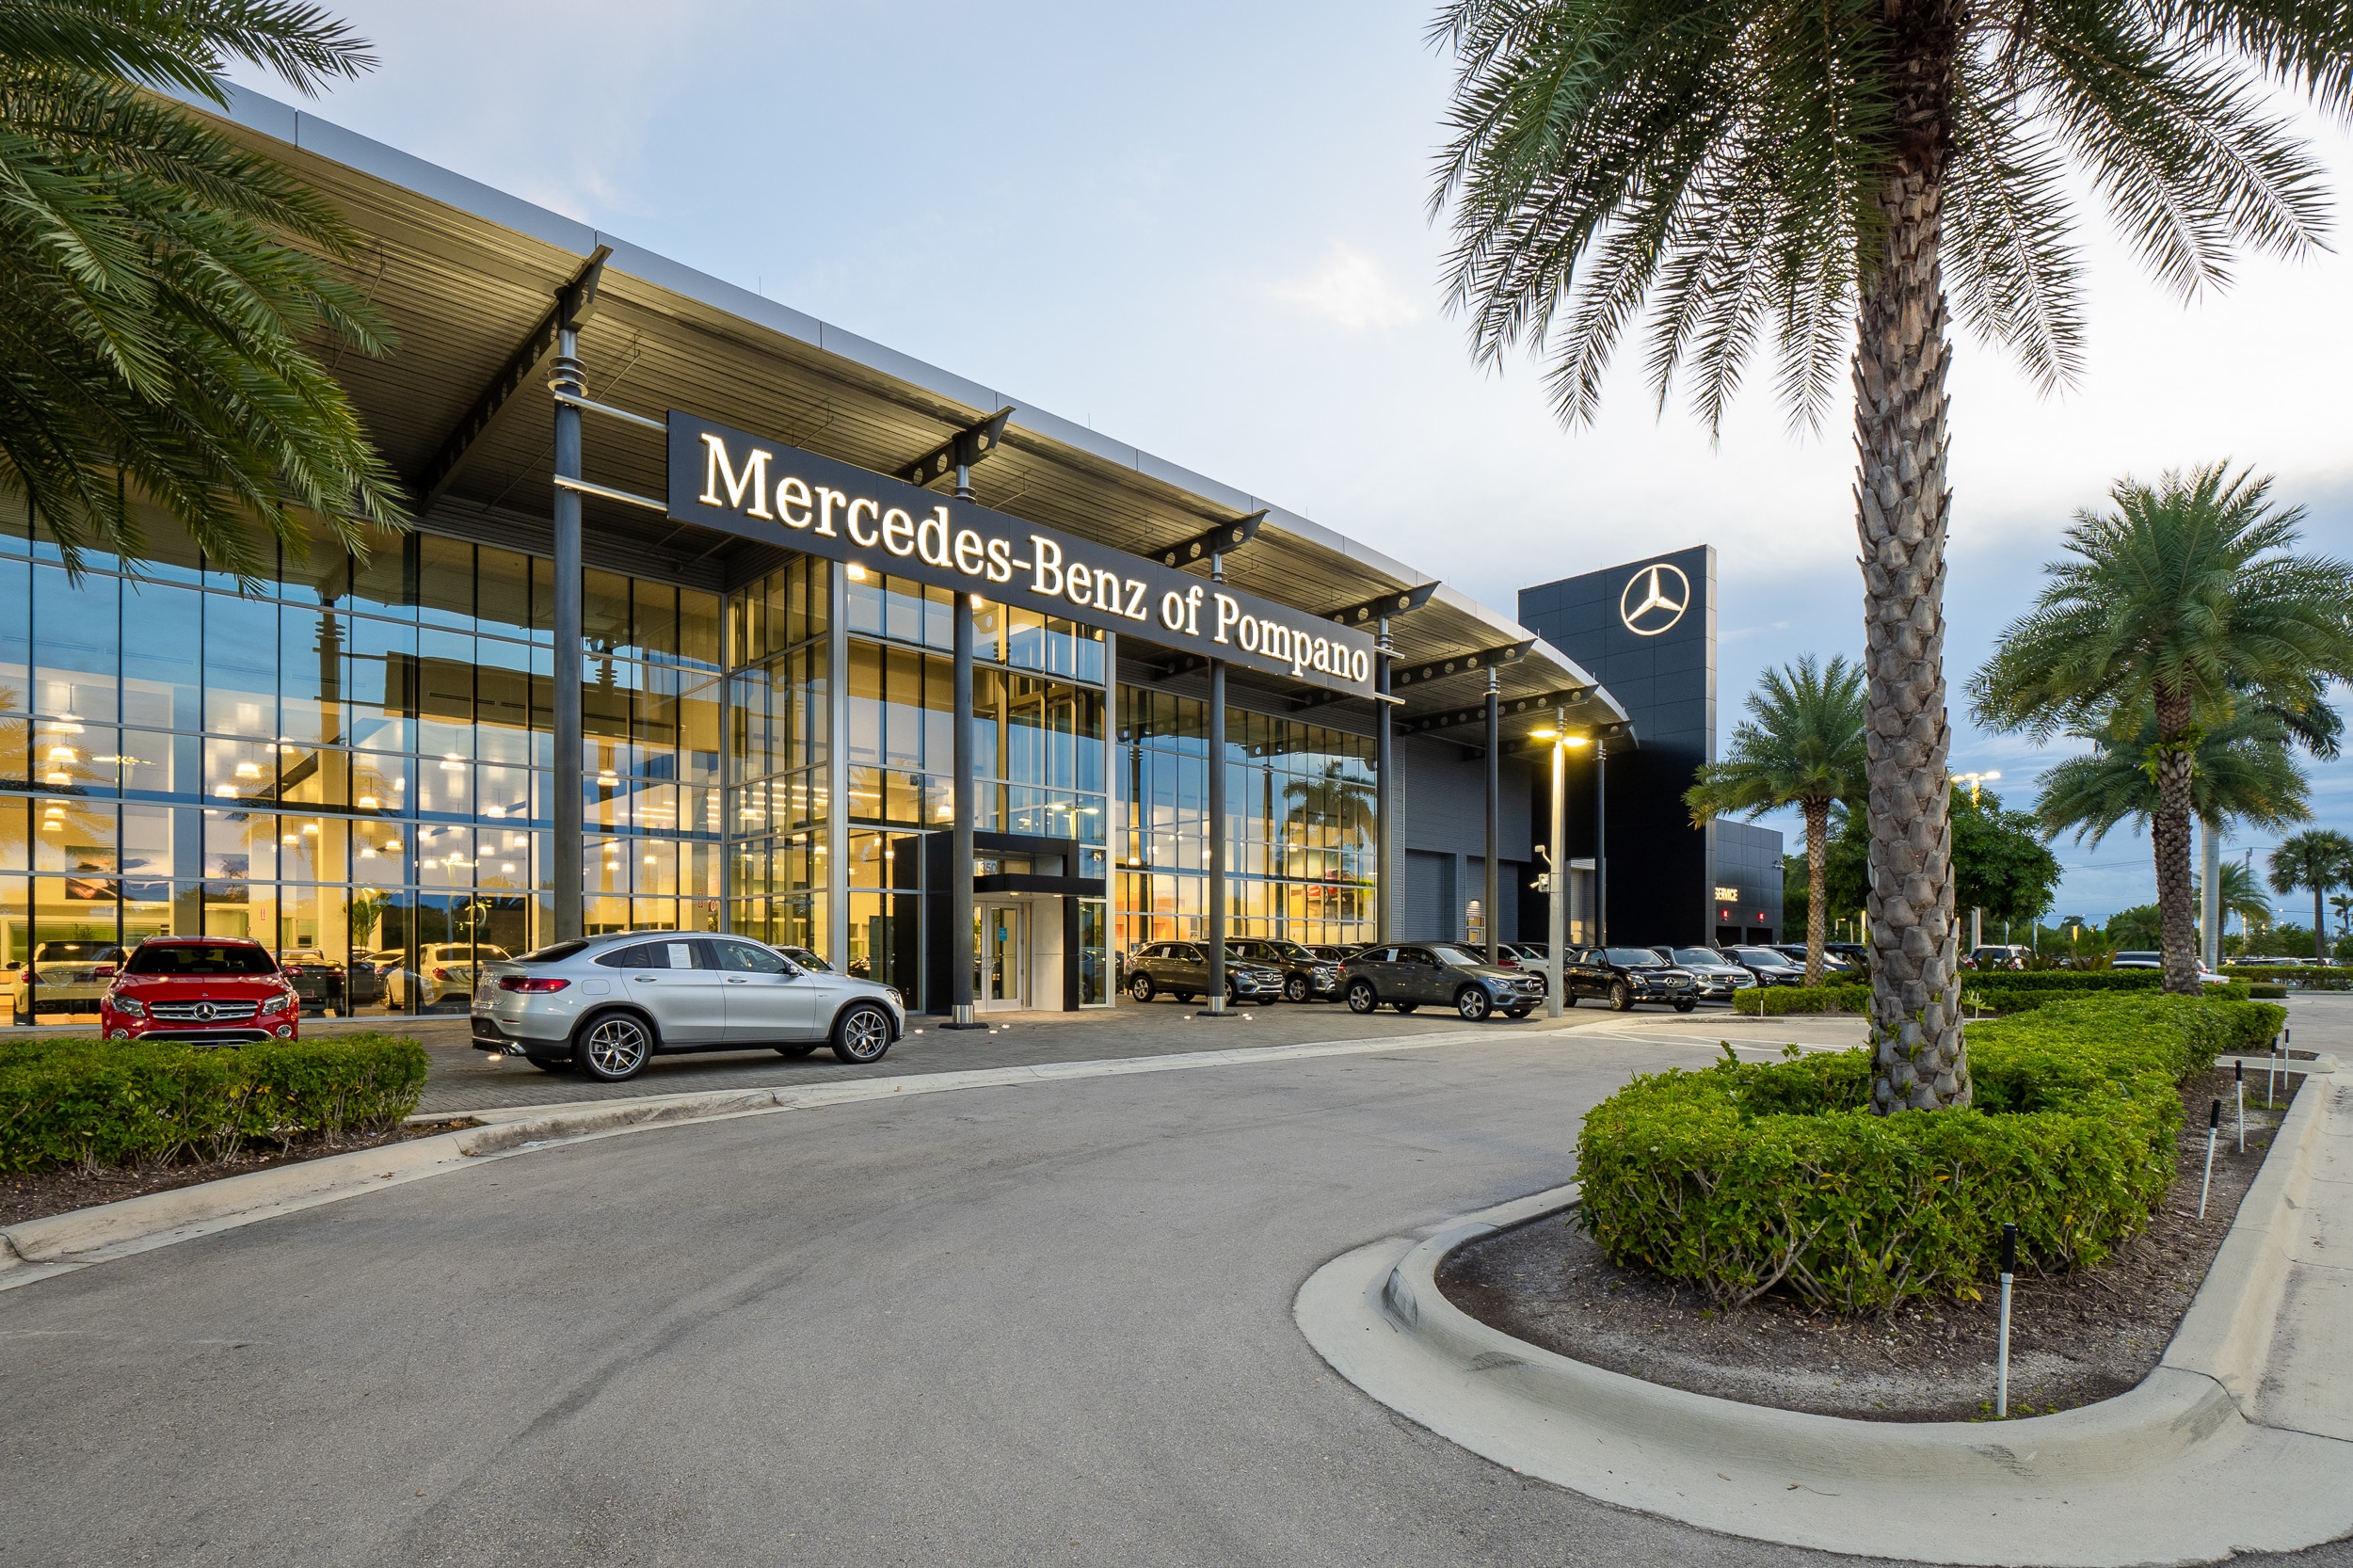 Outside view of Mercedes-Benz of Pompano